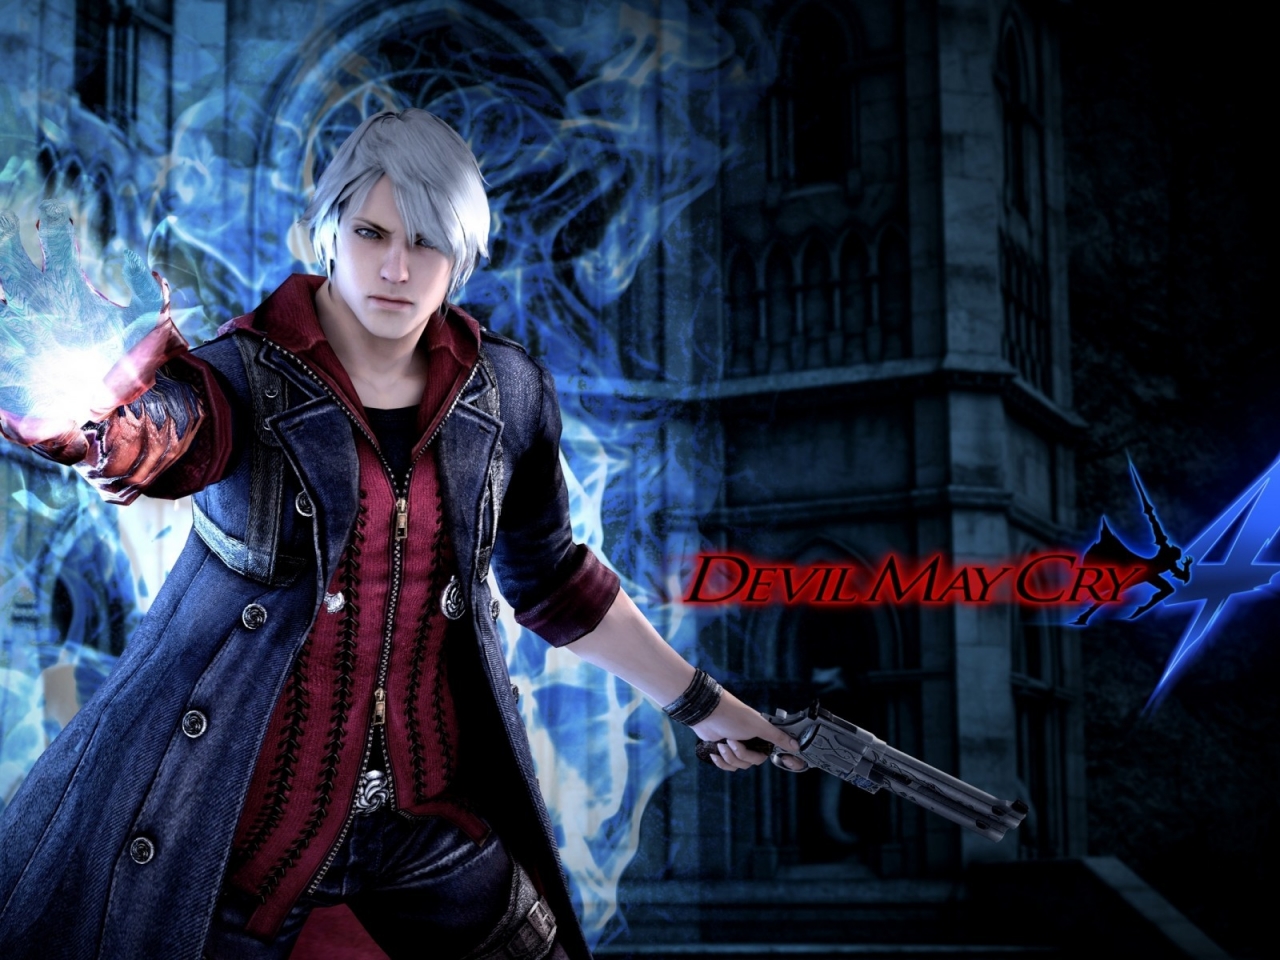 Devil May Cry 4 Poster for 1280 x 960 resolution